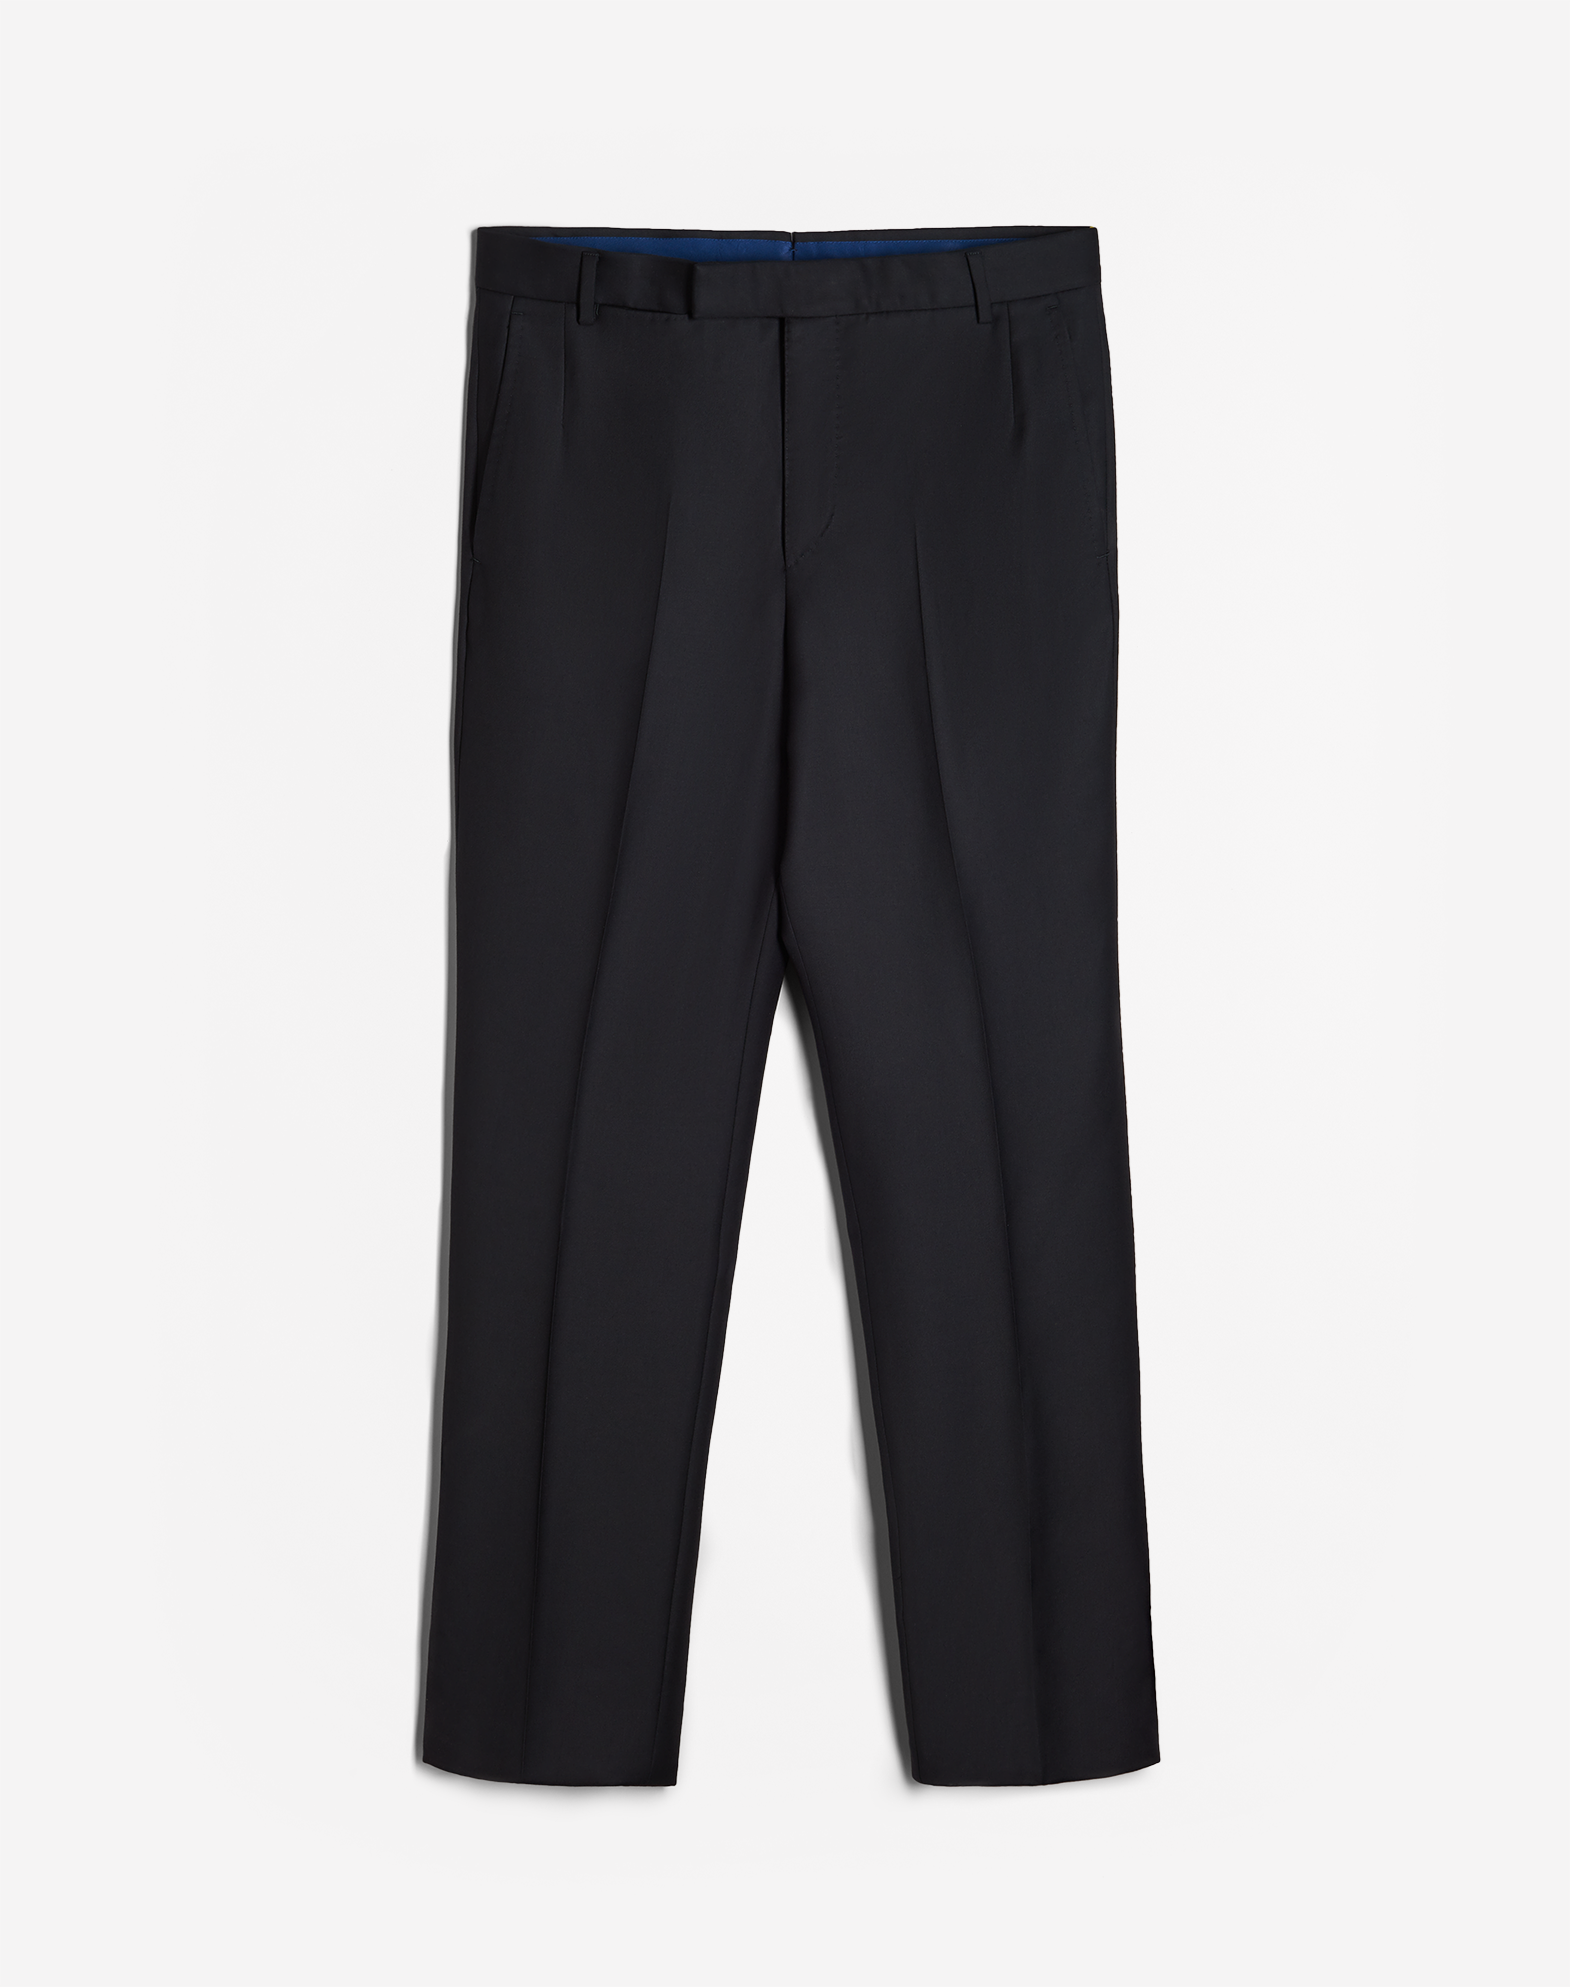 Dunhill Belgravia Fit Wool Trousers In Black